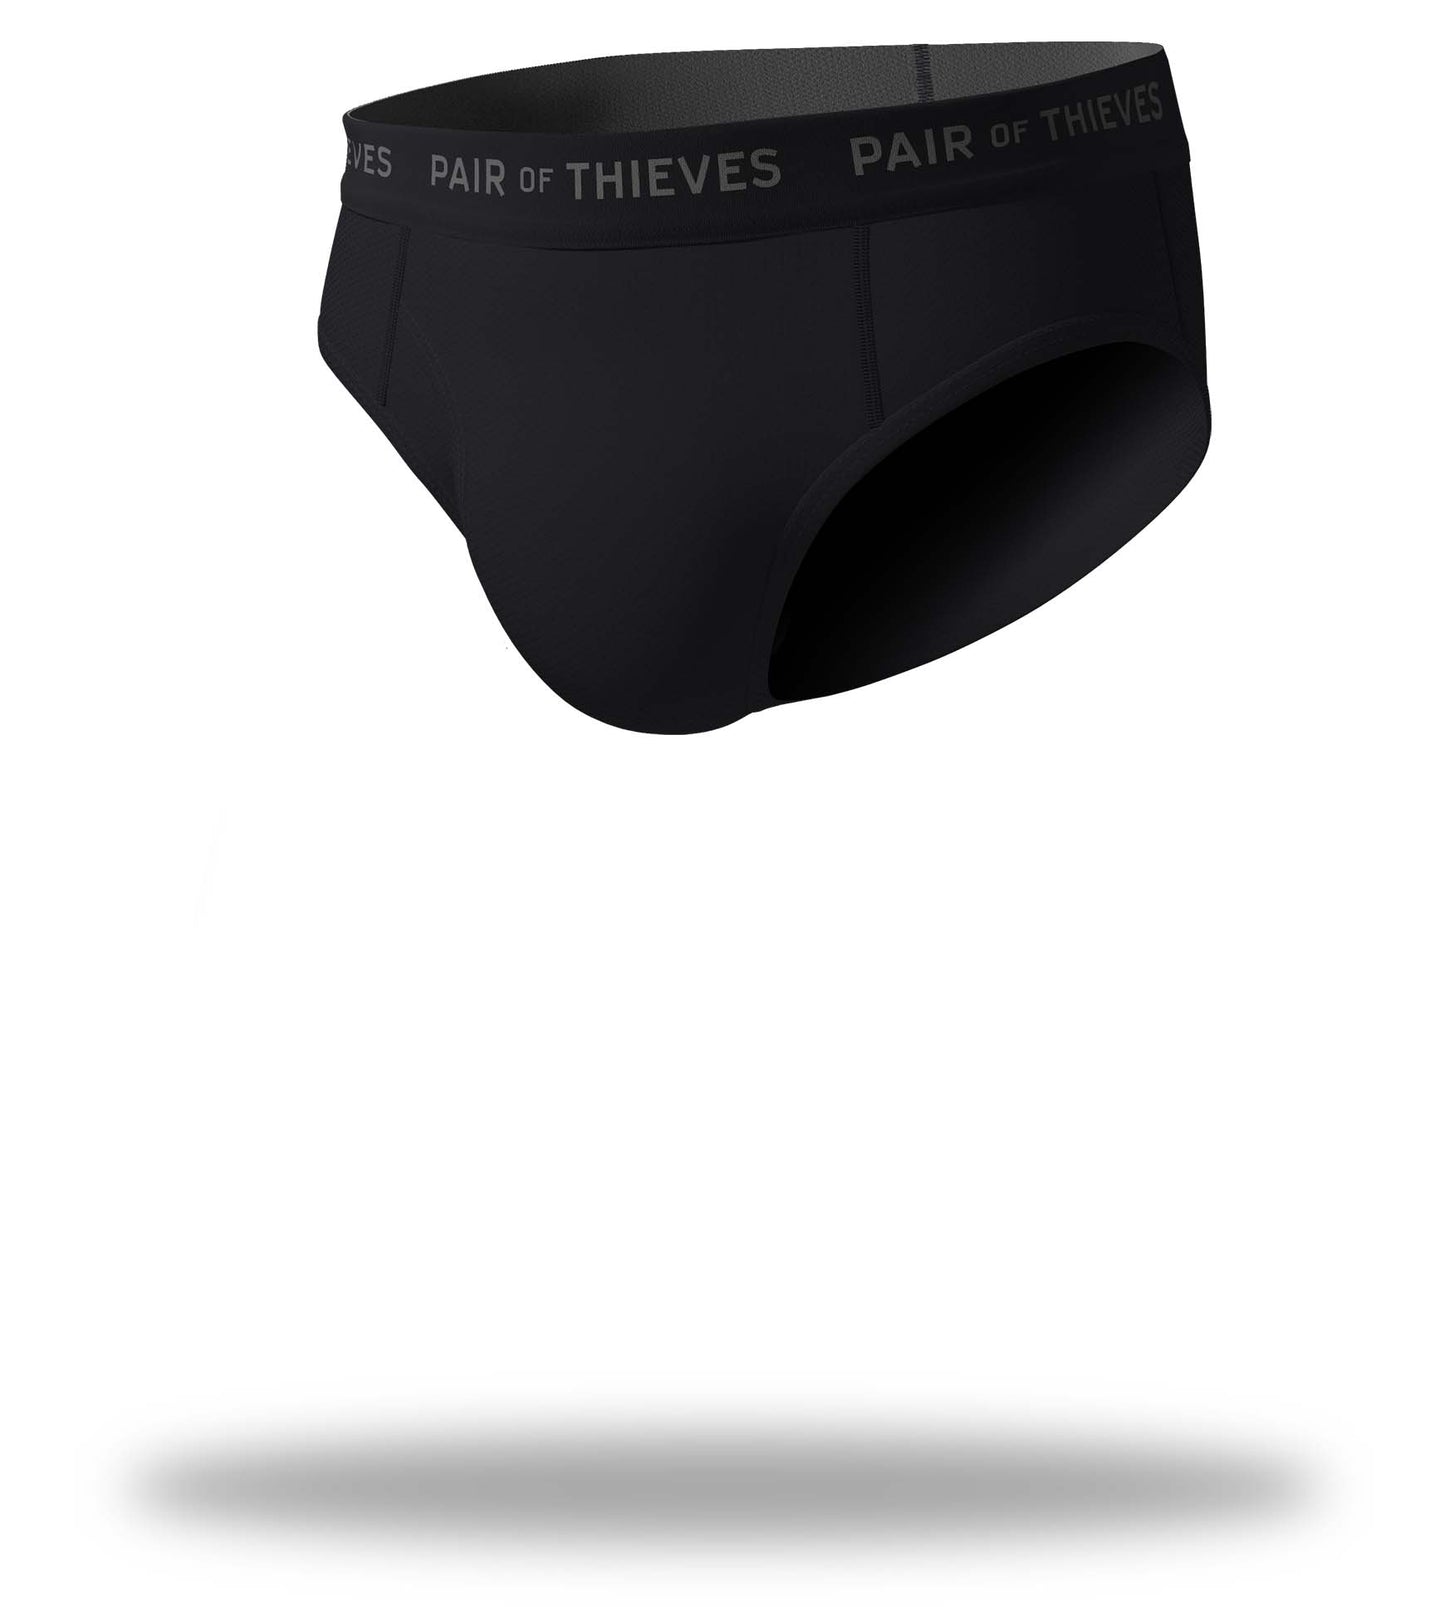 Buy Pair of Thieves Super Fit Men's Boxer Briefs, 3 Pack Underwear, AMZ  Exclusive, Black/Navy, Small at